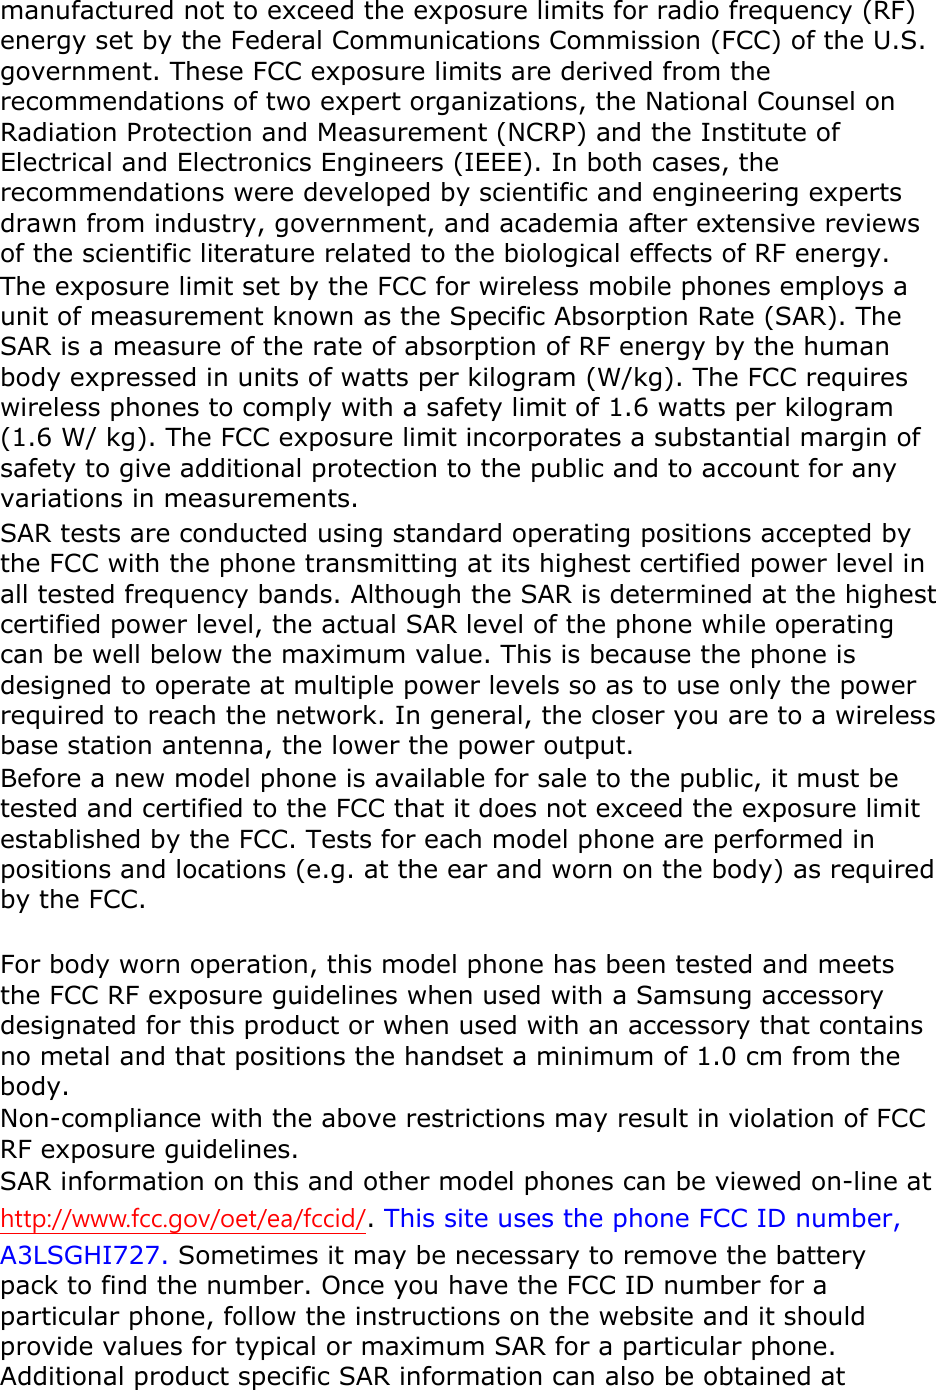 manufactured not to exceed the exposure limits for radio frequency (RF) energy set by the Federal Communications Commission (FCC) of the U.S. government. These FCC exposure limits are derived from the recommendations of two expert organizations, the National Counsel on Radiation Protection and Measurement (NCRP) and the Institute of Electrical and Electronics Engineers (IEEE). In both cases, the recommendations were developed by scientific and engineering experts drawn from industry, government, and academia after extensive reviews of the scientific literature related to the biological effects of RF energy. The exposure limit set by the FCC for wireless mobile phones employs a unit of measurement known as the Specific Absorption Rate (SAR). The SAR is a measure of the rate of absorption of RF energy by the human body expressed in units of watts per kilogram (W/kg). The FCC requires wireless phones to comply with a safety limit of 1.6 watts per kilogram (1.6 W/ kg). The FCC exposure limit incorporates a substantial margin of safety to give additional protection to the public and to account for any variations in measurements. SAR tests are conducted using standard operating positions accepted by the FCC with the phone transmitting at its highest certified power level in all tested frequency bands. Although the SAR is determined at the highest certified power level, the actual SAR level of the phone while operating can be well below the maximum value. This is because the phone is designed to operate at multiple power levels so as to use only the power required to reach the network. In general, the closer you are to a wireless base station antenna, the lower the power output. Before a new model phone is available for sale to the public, it must be tested and certified to the FCC that it does not exceed the exposure limit established by the FCC. Tests for each model phone are performed in positions and locations (e.g. at the ear and worn on the body) as required by the FCC.      For body worn operation, this model phone has been tested and meets the FCC RF exposure guidelines when used with a Samsung accessory designated for this product or when used with an accessory that contains no metal and that positions the handset a minimum of 1.0 cm from the body.  Non-compliance with the above restrictions may result in violation of FCC RF exposure guidelines. SAR information on this and other model phones can be viewed on-line at http://www.fcc.gov/oet/ea/fccid/. This site uses the phone FCC ID number, A3LSGHI727. Sometimes it may be necessary to remove the battery pack to find the number. Once you have the FCC ID number for a particular phone, follow the instructions on the website and it should provide values for typical or maximum SAR for a particular phone. Additional product specific SAR information can also be obtained at 